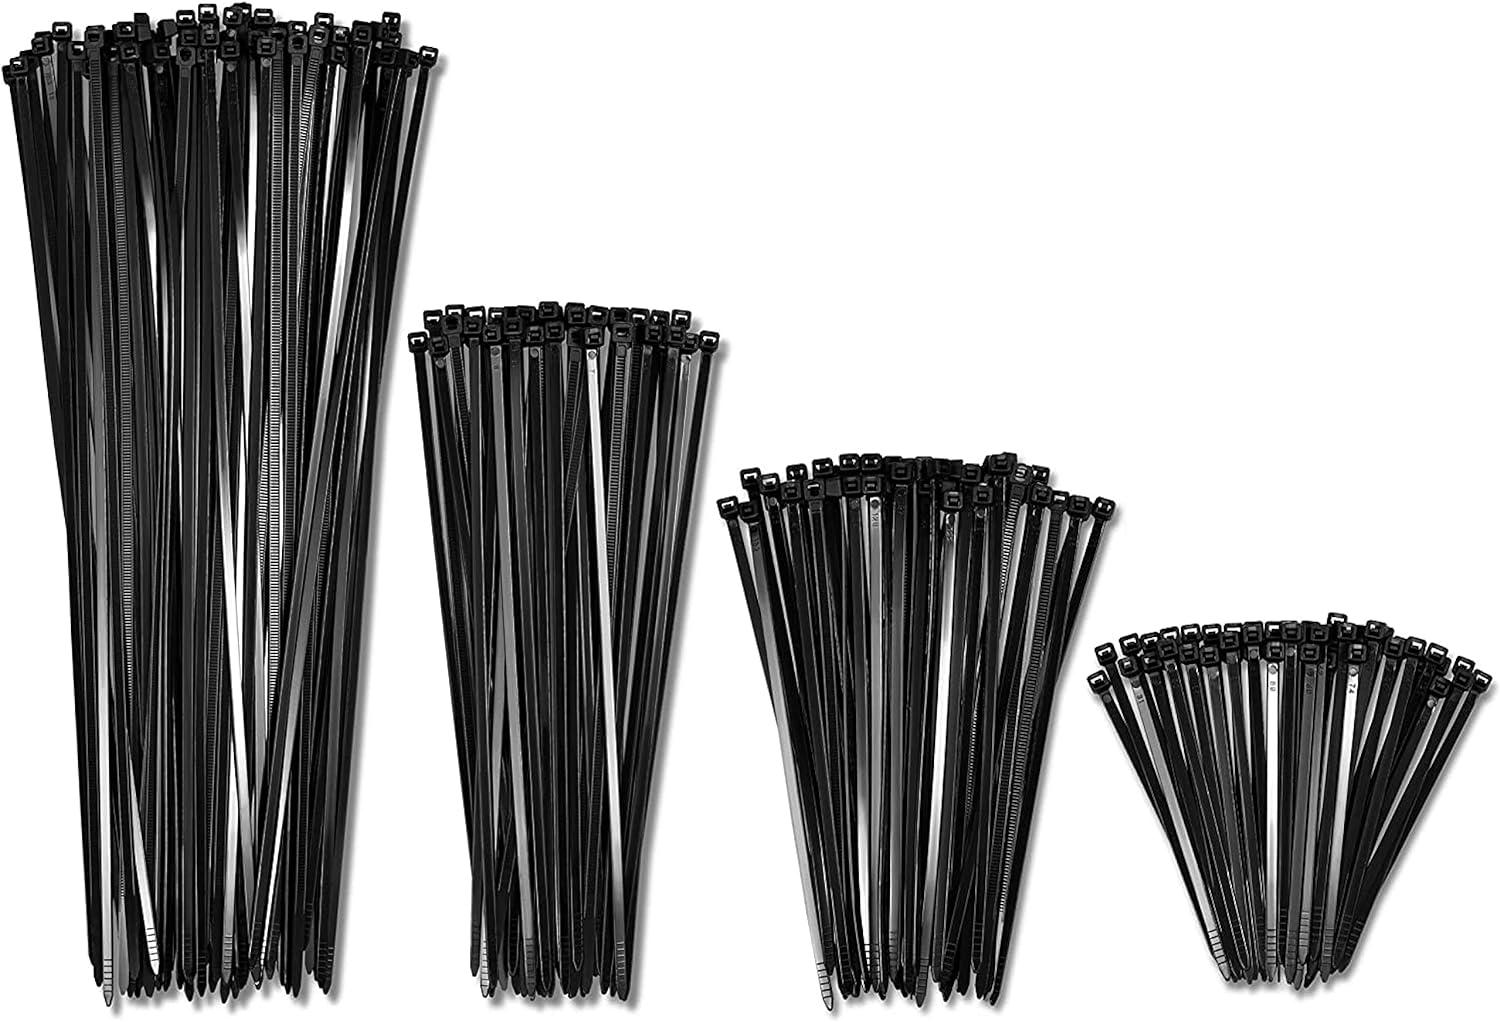 Black Cable Zip Ties Assortment 400 Pack for $4.99